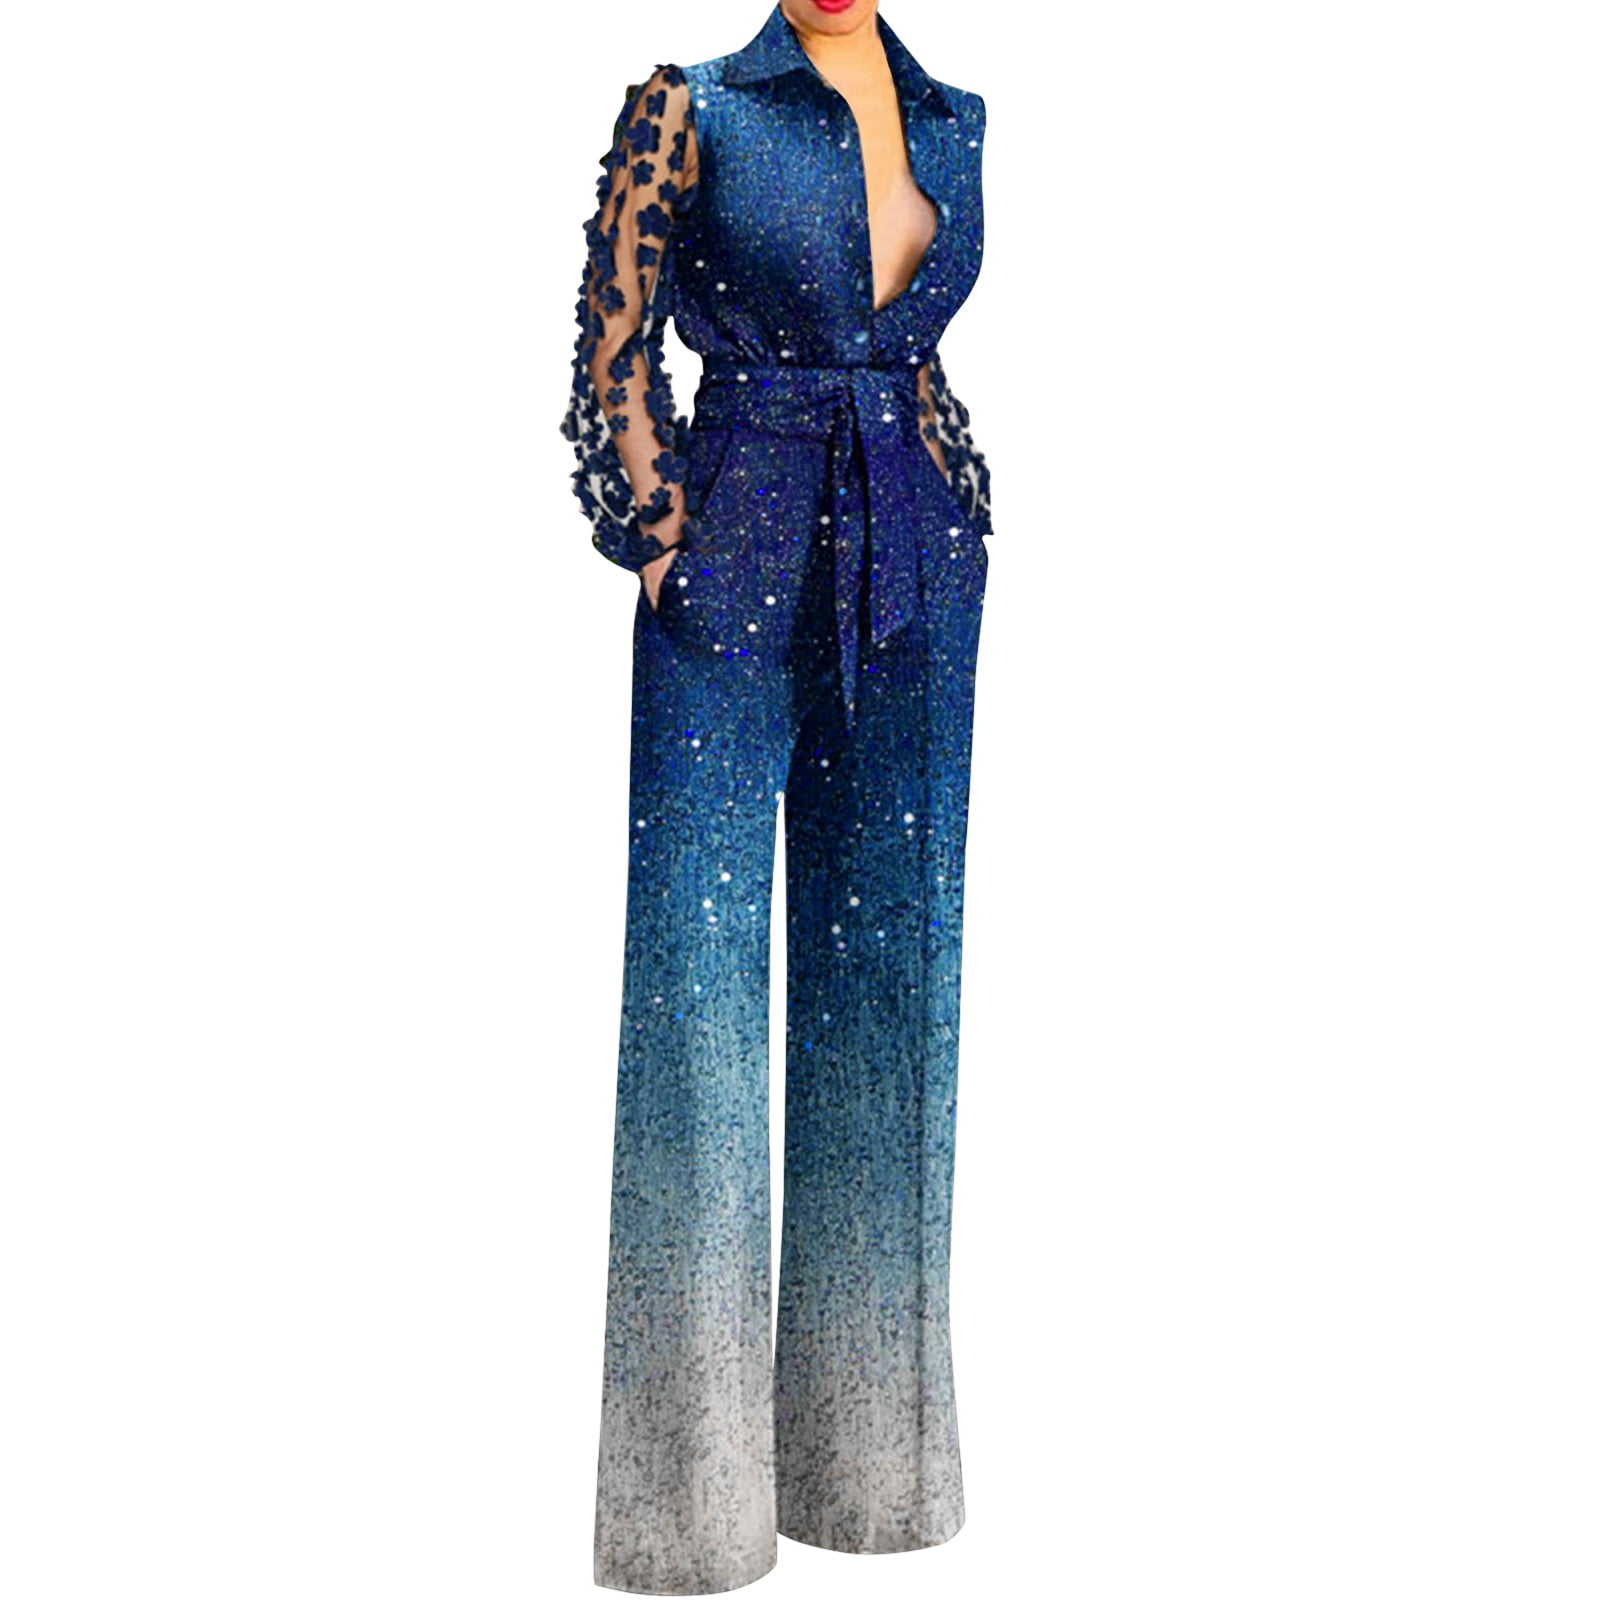 wofedyo jumpsuits for women Lapel Deep V Lace Stitching Bell Bottoms ...